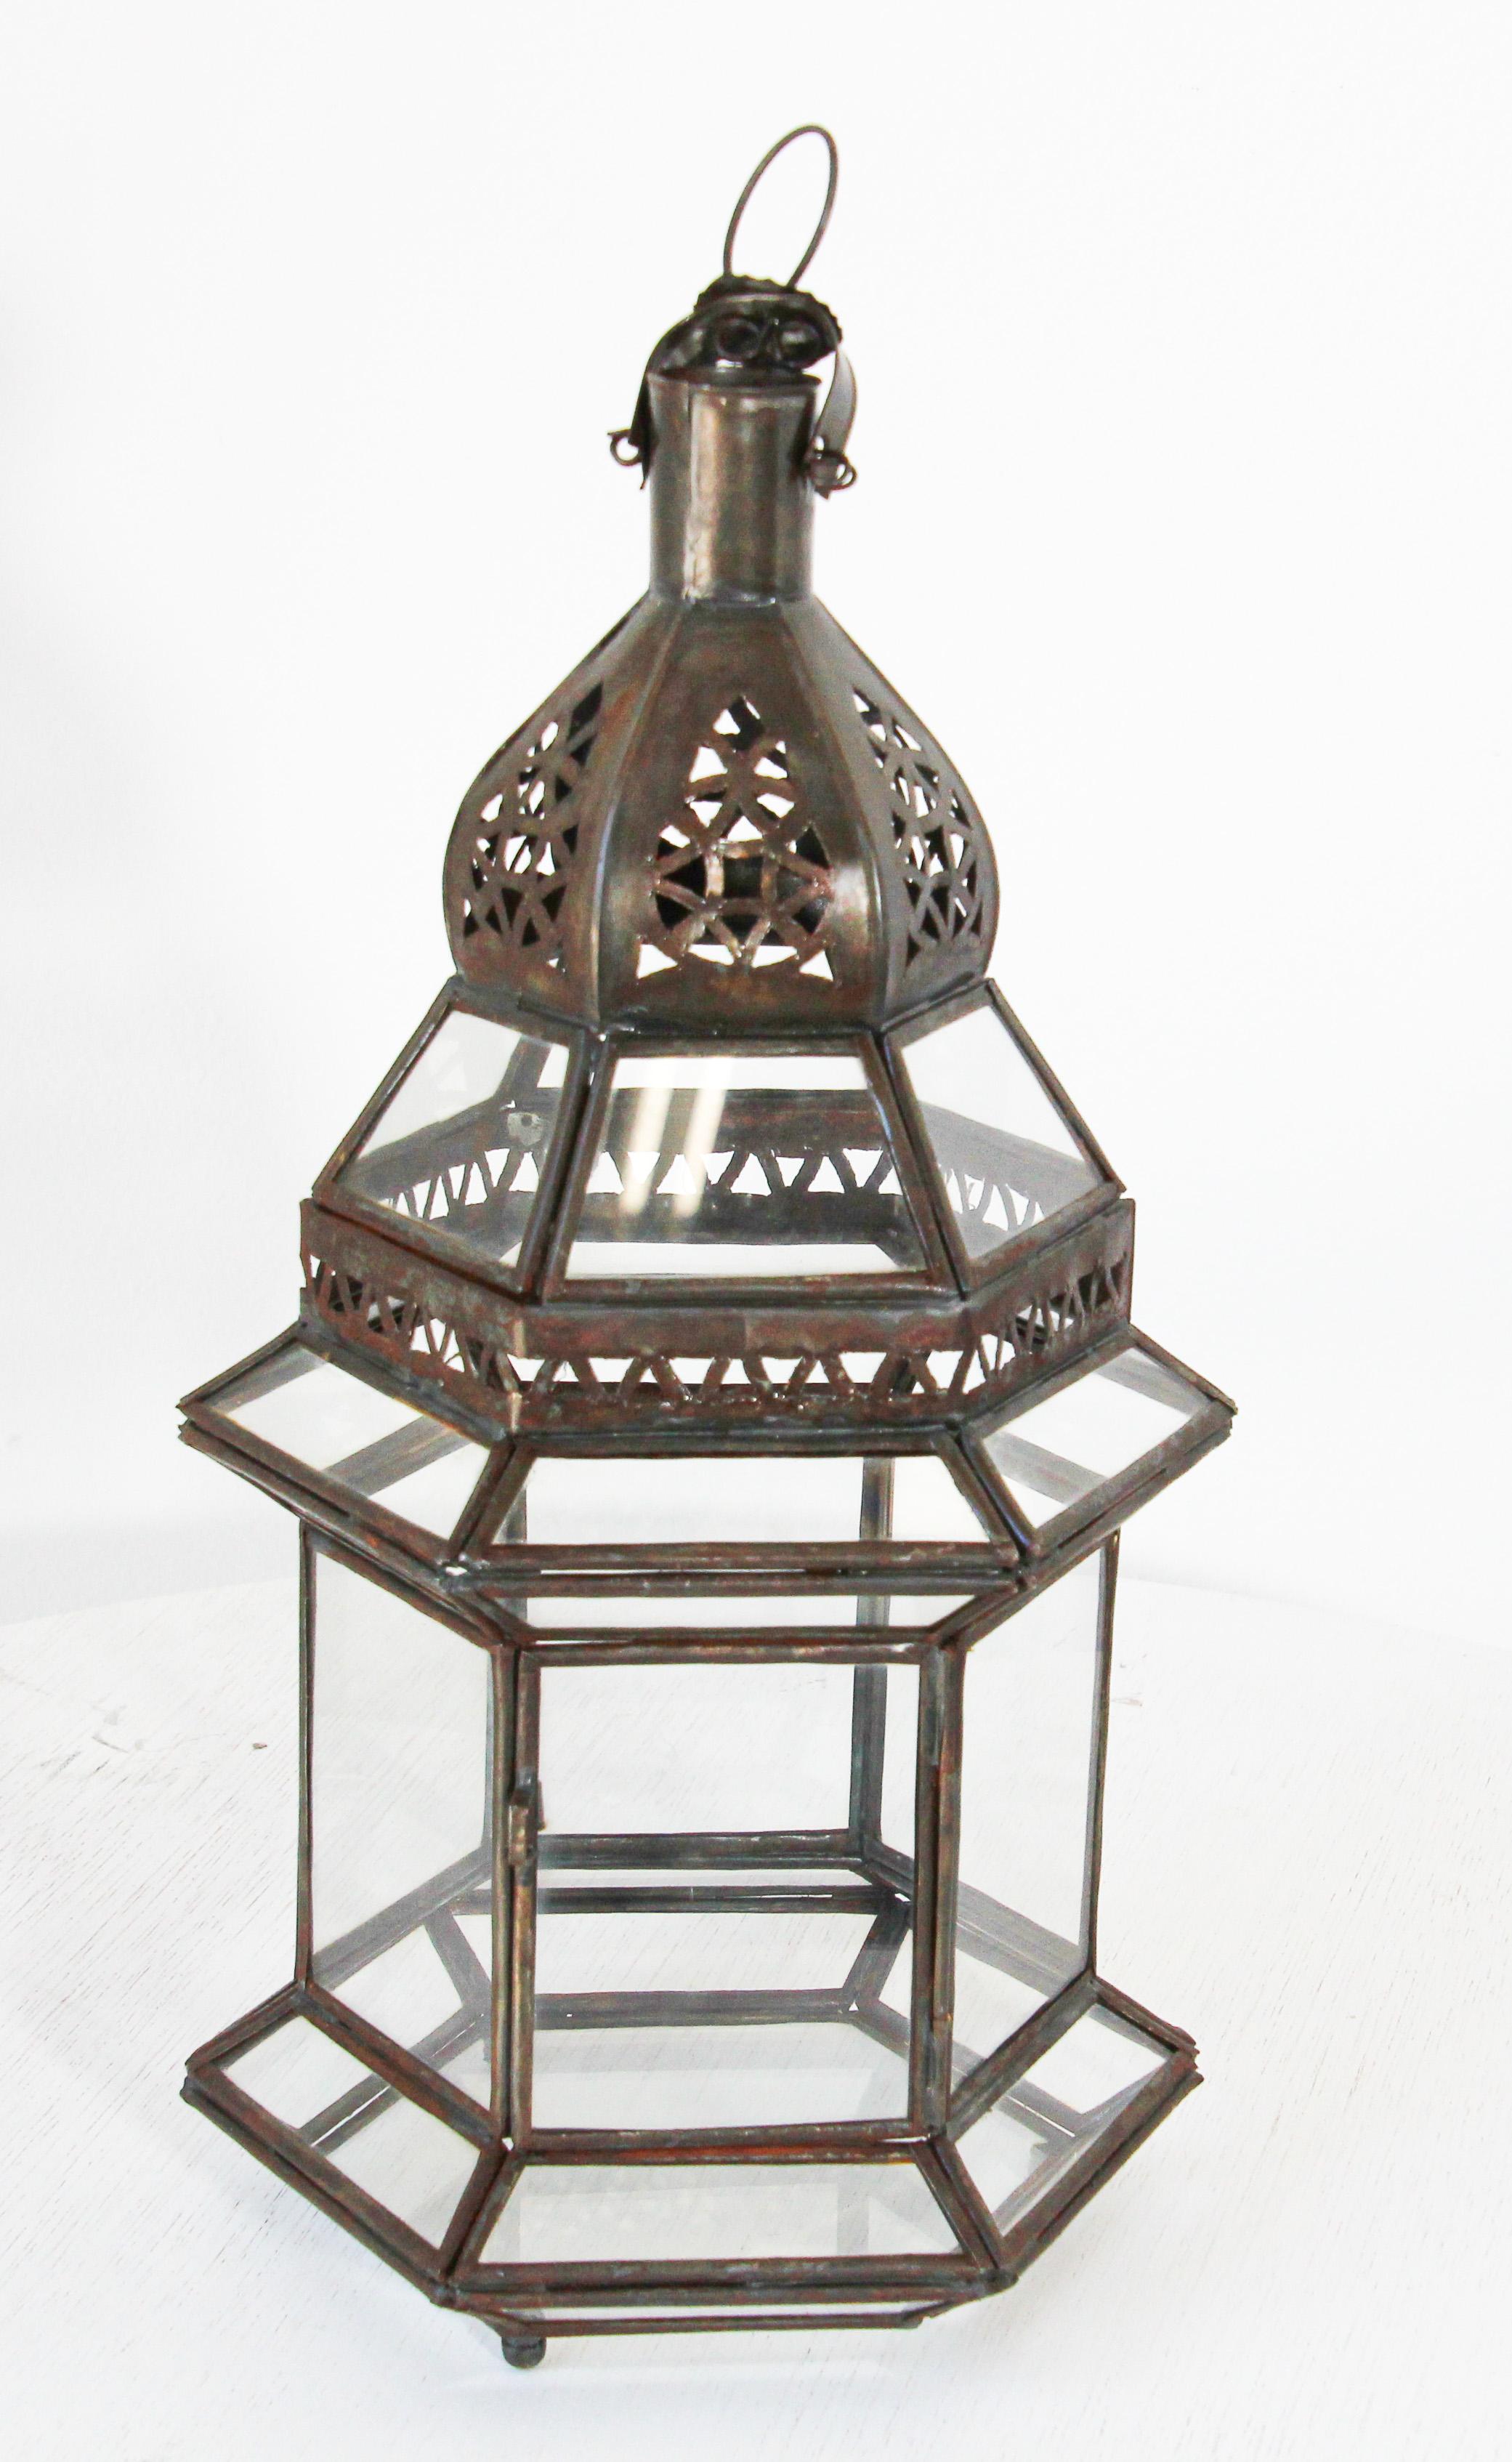 Moroccan metal and clear glass lanterns.
Hurricane candle lamp in hexagonal shape with vintage rust color metal finish.
The top of the lantern is hand-cut with Moorish designs.
The lantern has a small door to access the inside. 
Many of our